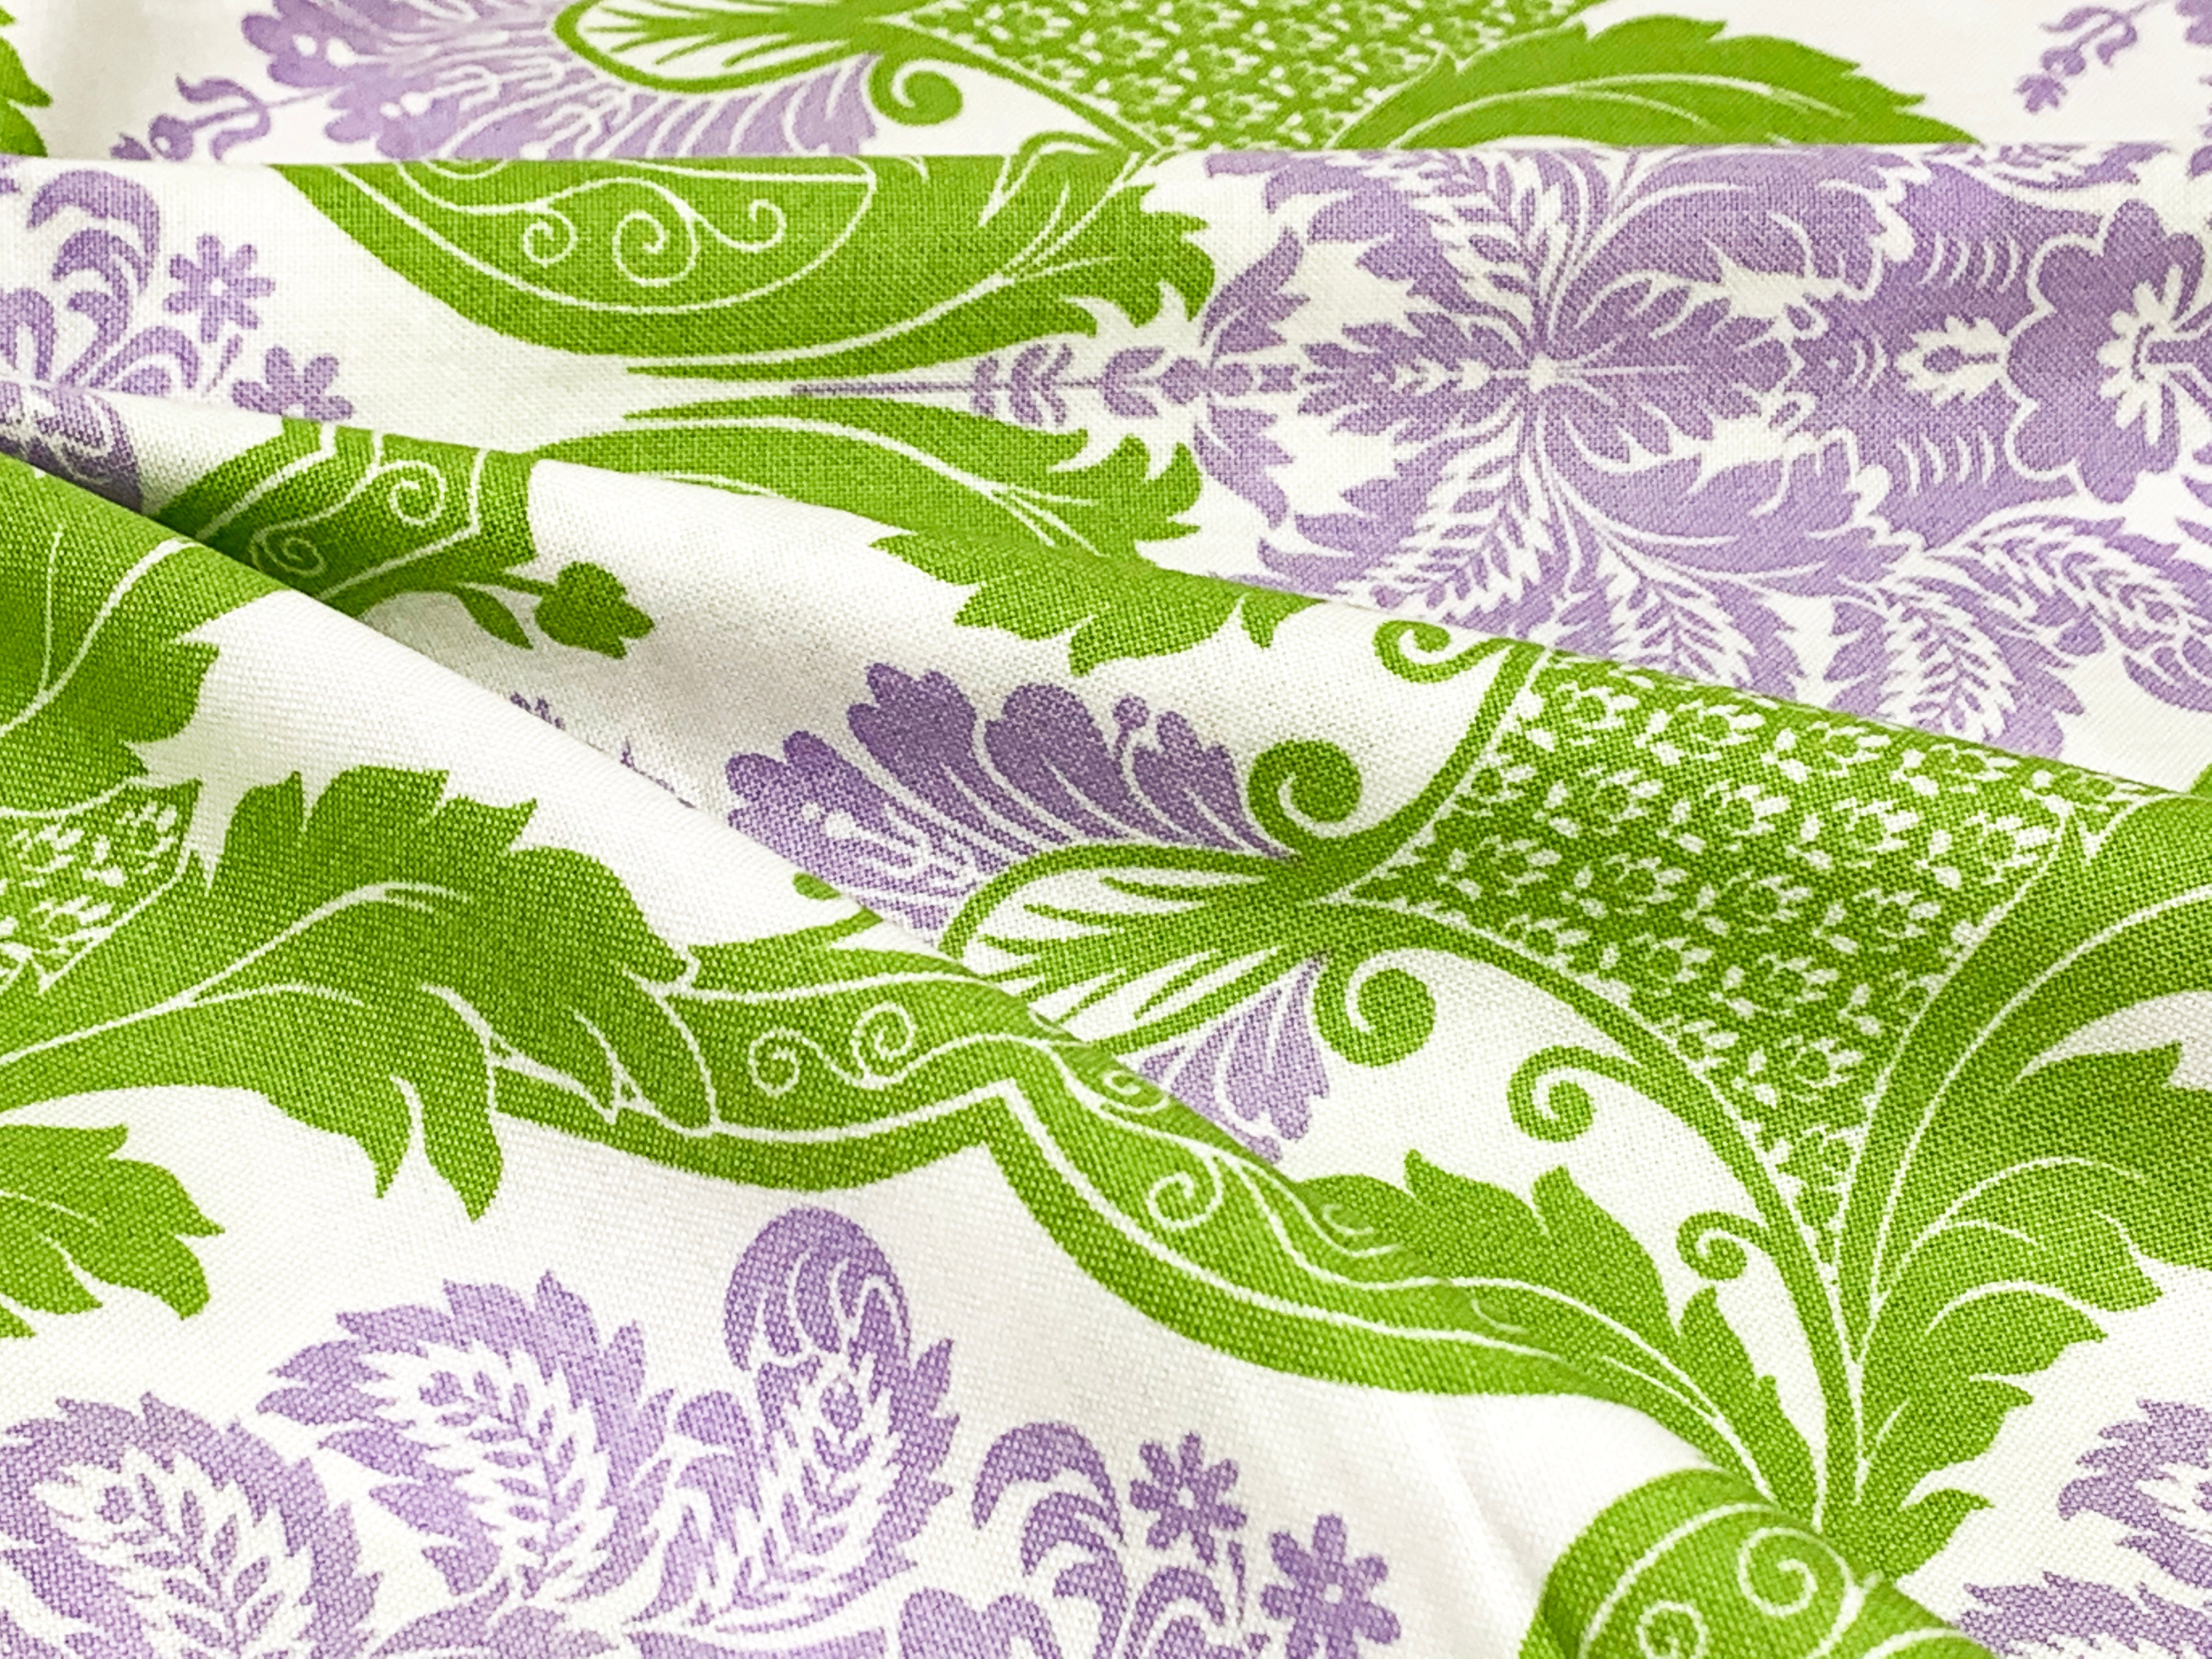 Waverly Inspirations Cotton 44" Damask Lilac Color Sewing Fabric by the Yard